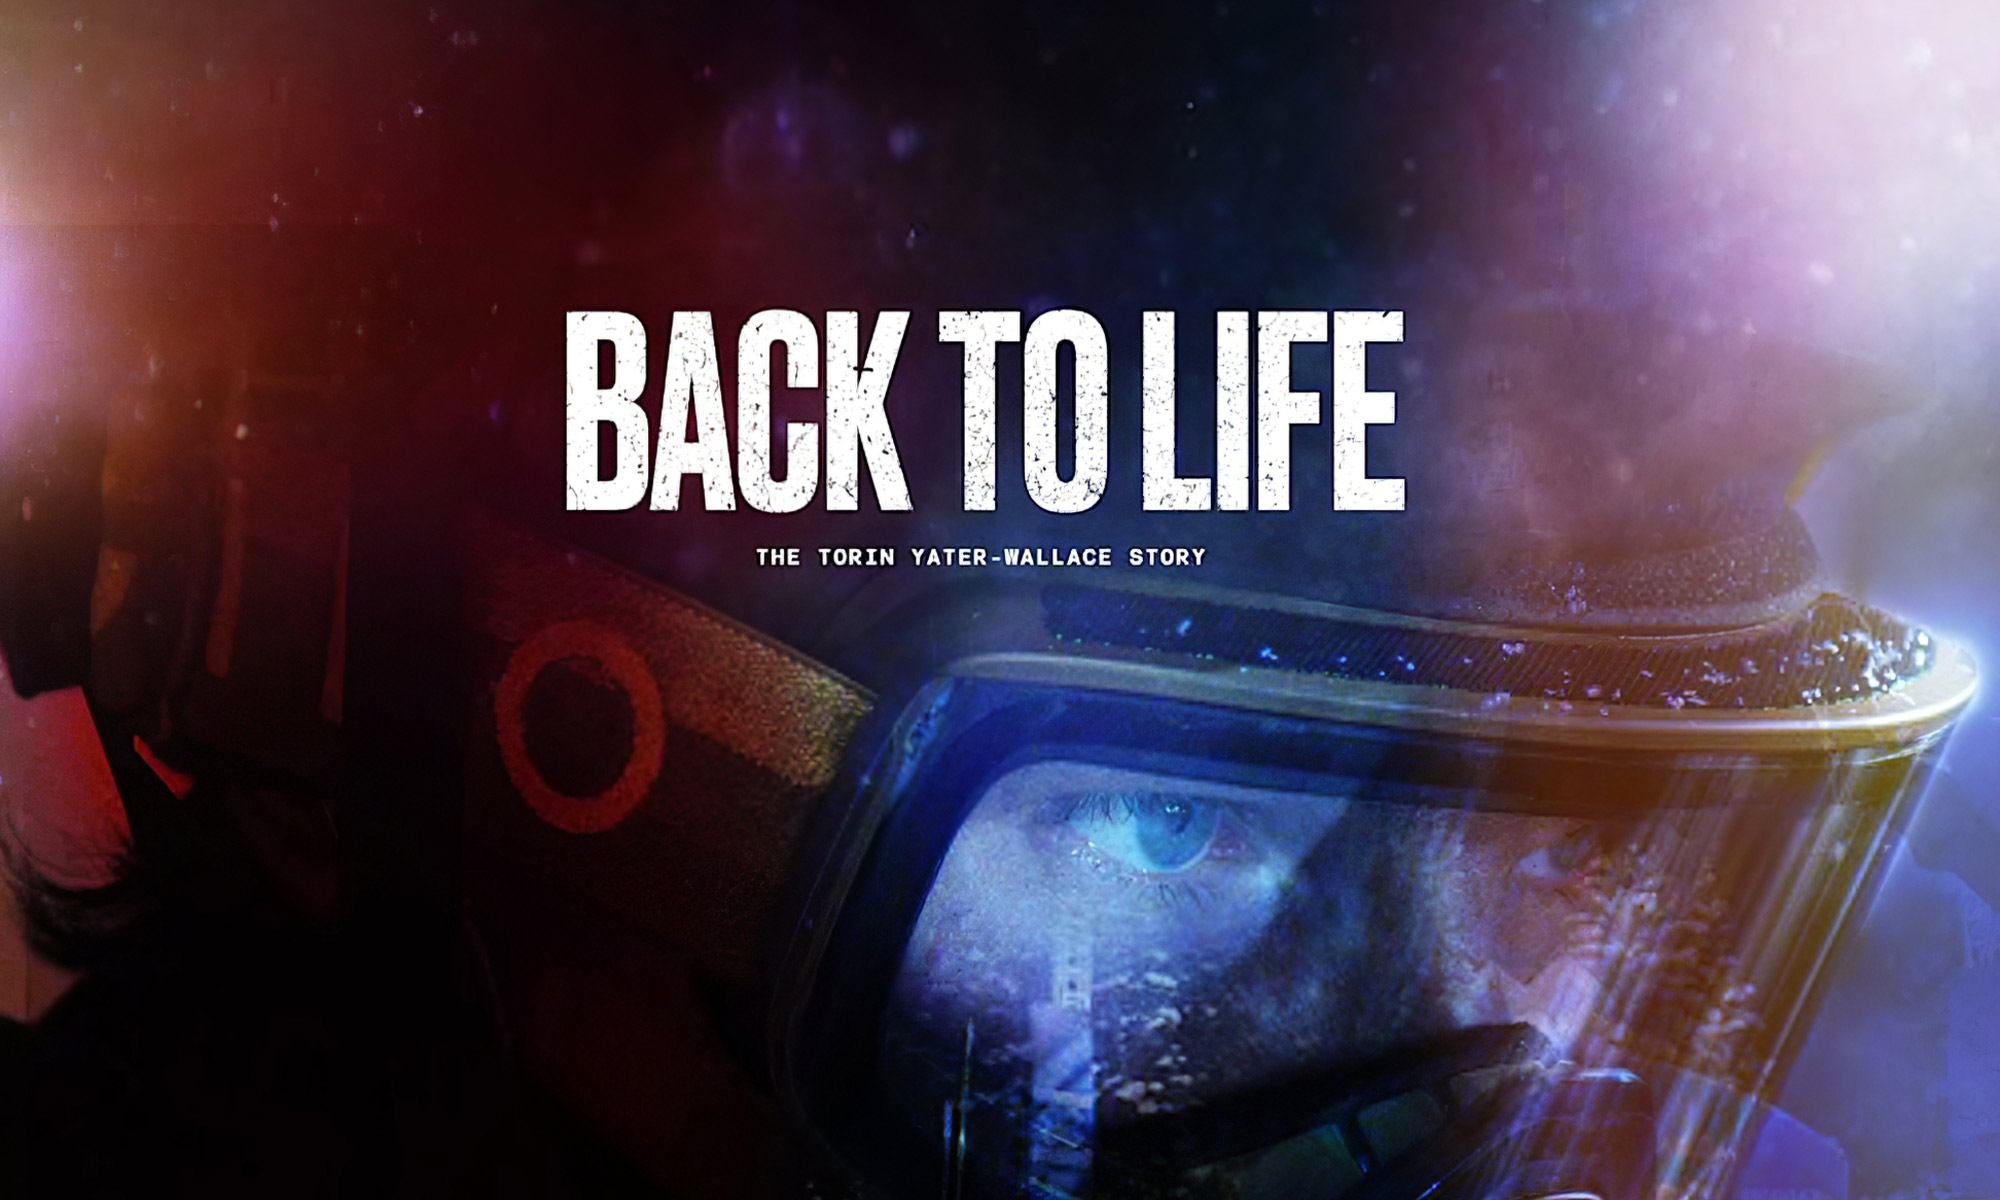 Back to life